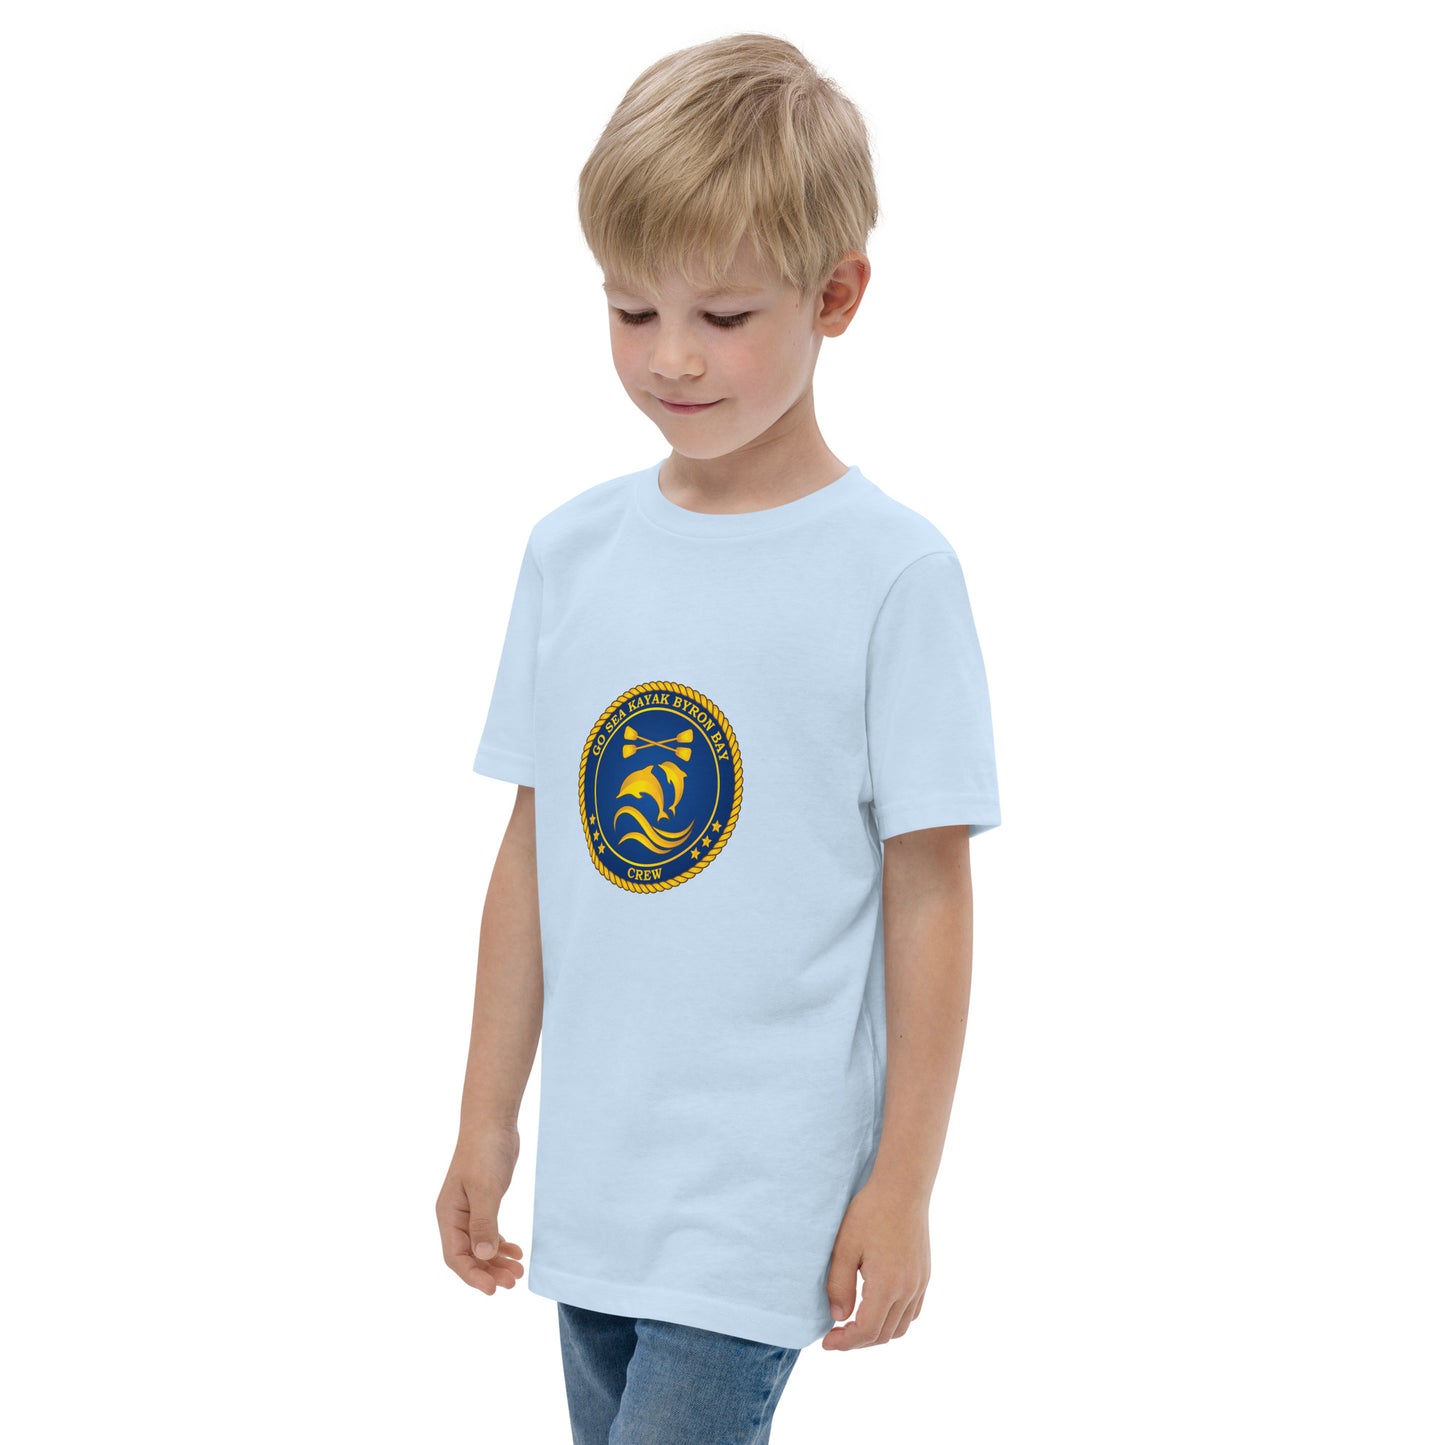  Kids T-Shirt - Light Blue - side view, being warn on boy standing with his arms by his side - Go Sea Kayak Byron Bay Crew (issue 2018-2019) logo on front - Genuine Byron Bay Merchandise | Produced by Go Sea Kayak Byron Bay 